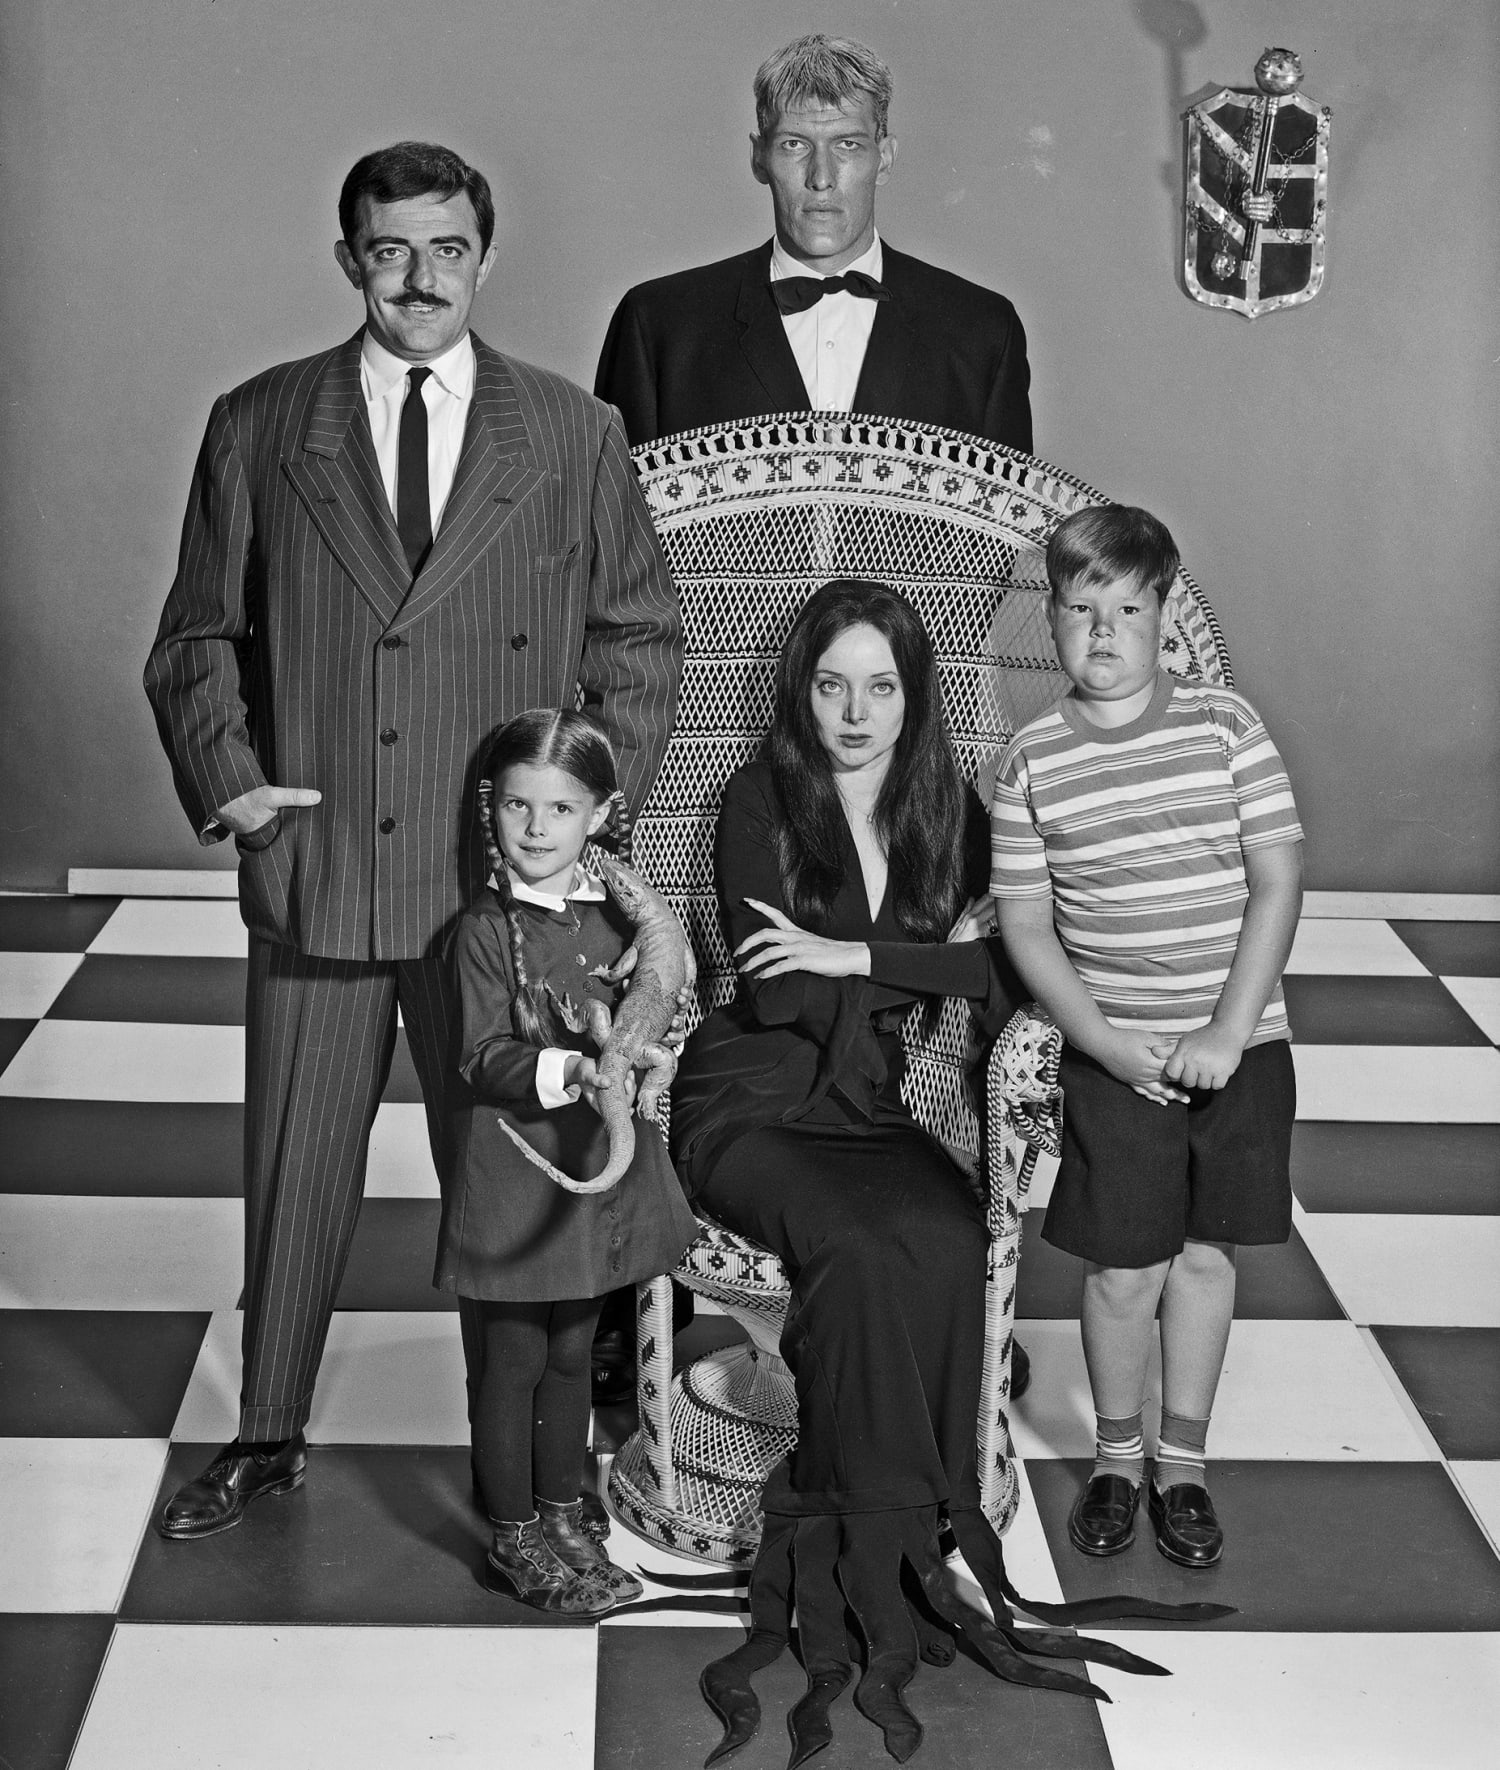 Lisa Loring, who played Wednesday in the original ‘Addams Family’ series, dies at 64